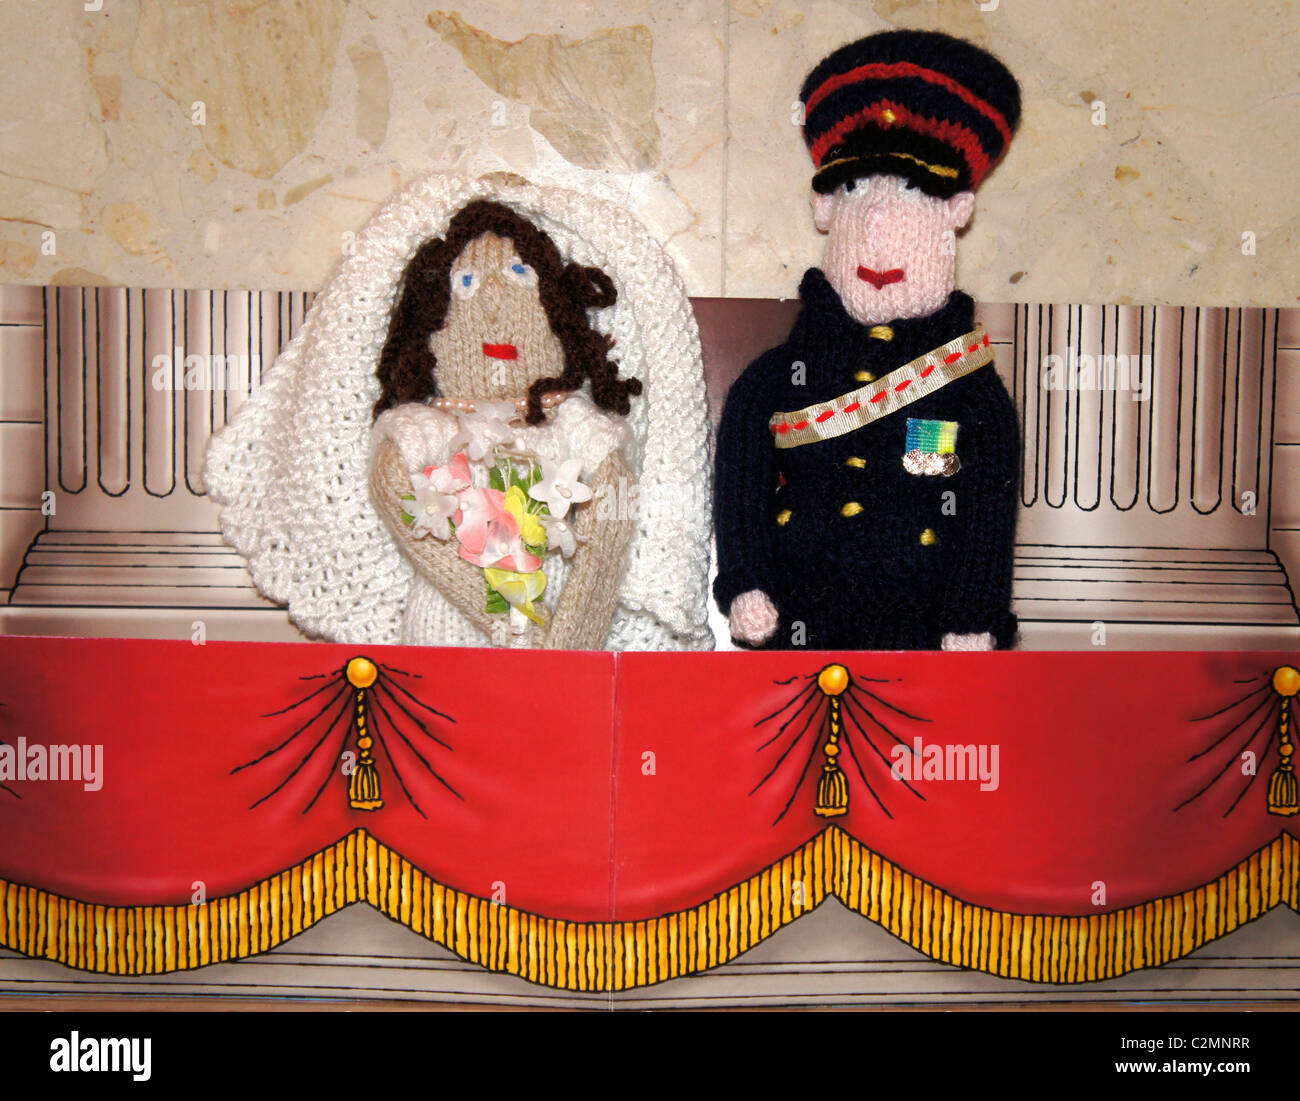 Royal wedding knitted figures, Kate Middleton and Prince Harry Stock Photo